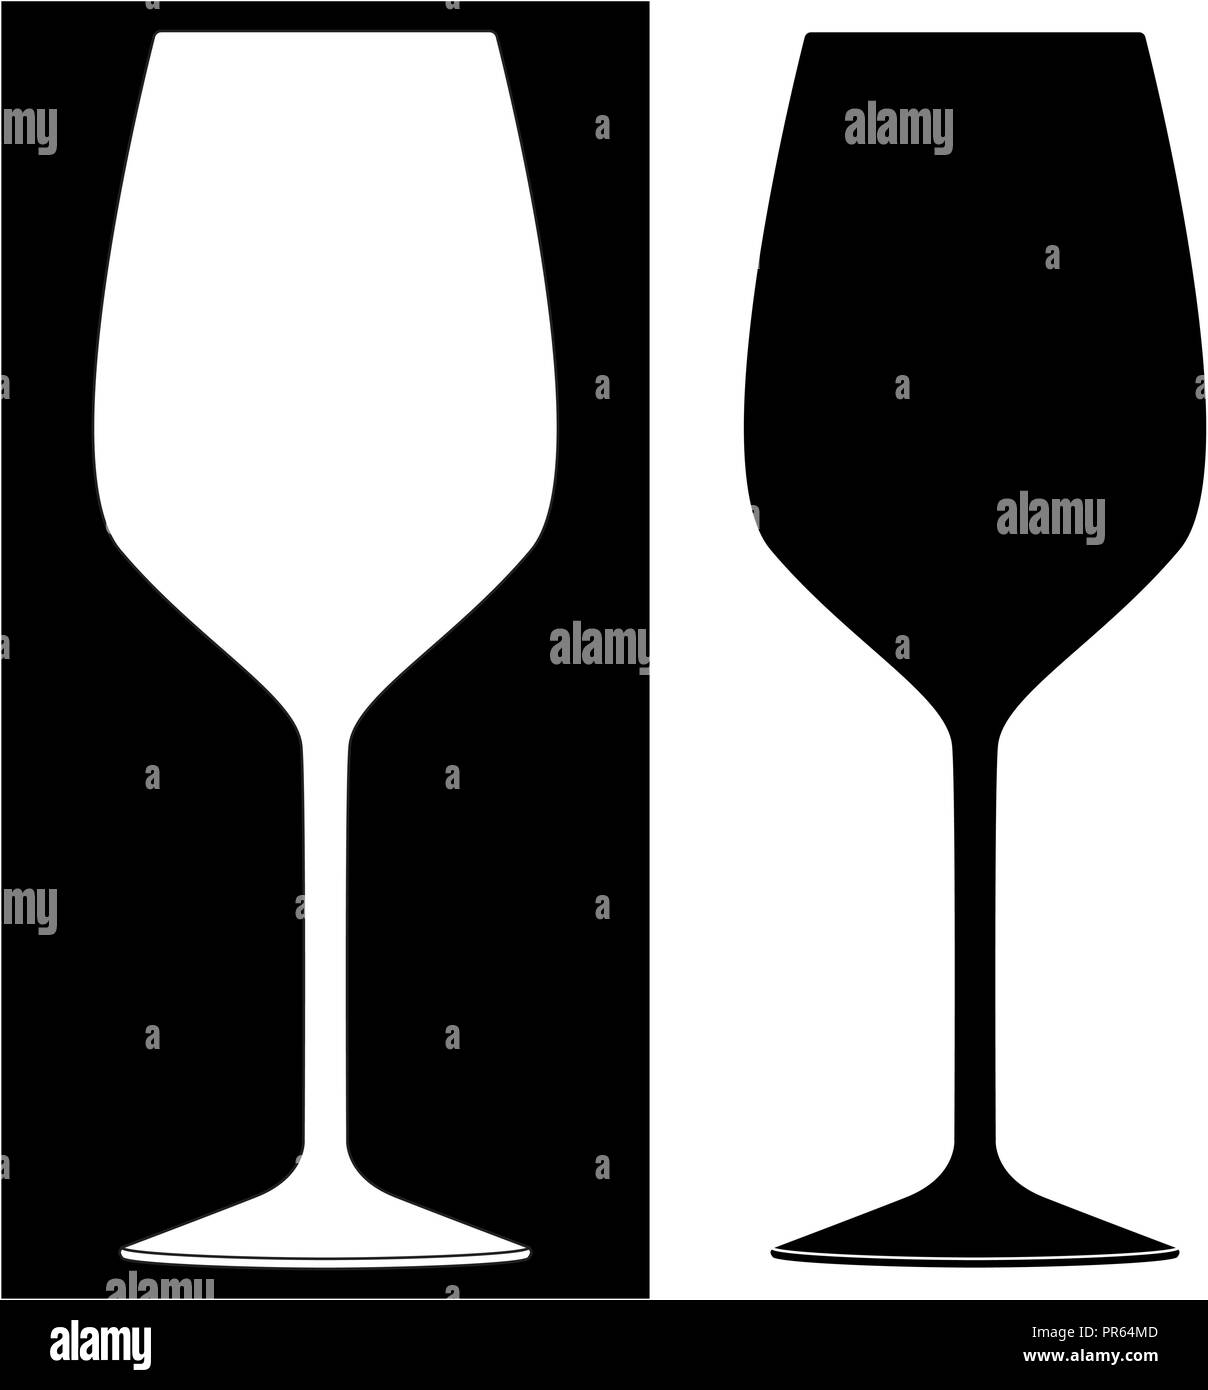 Glass of wine. Icons Stock Vector